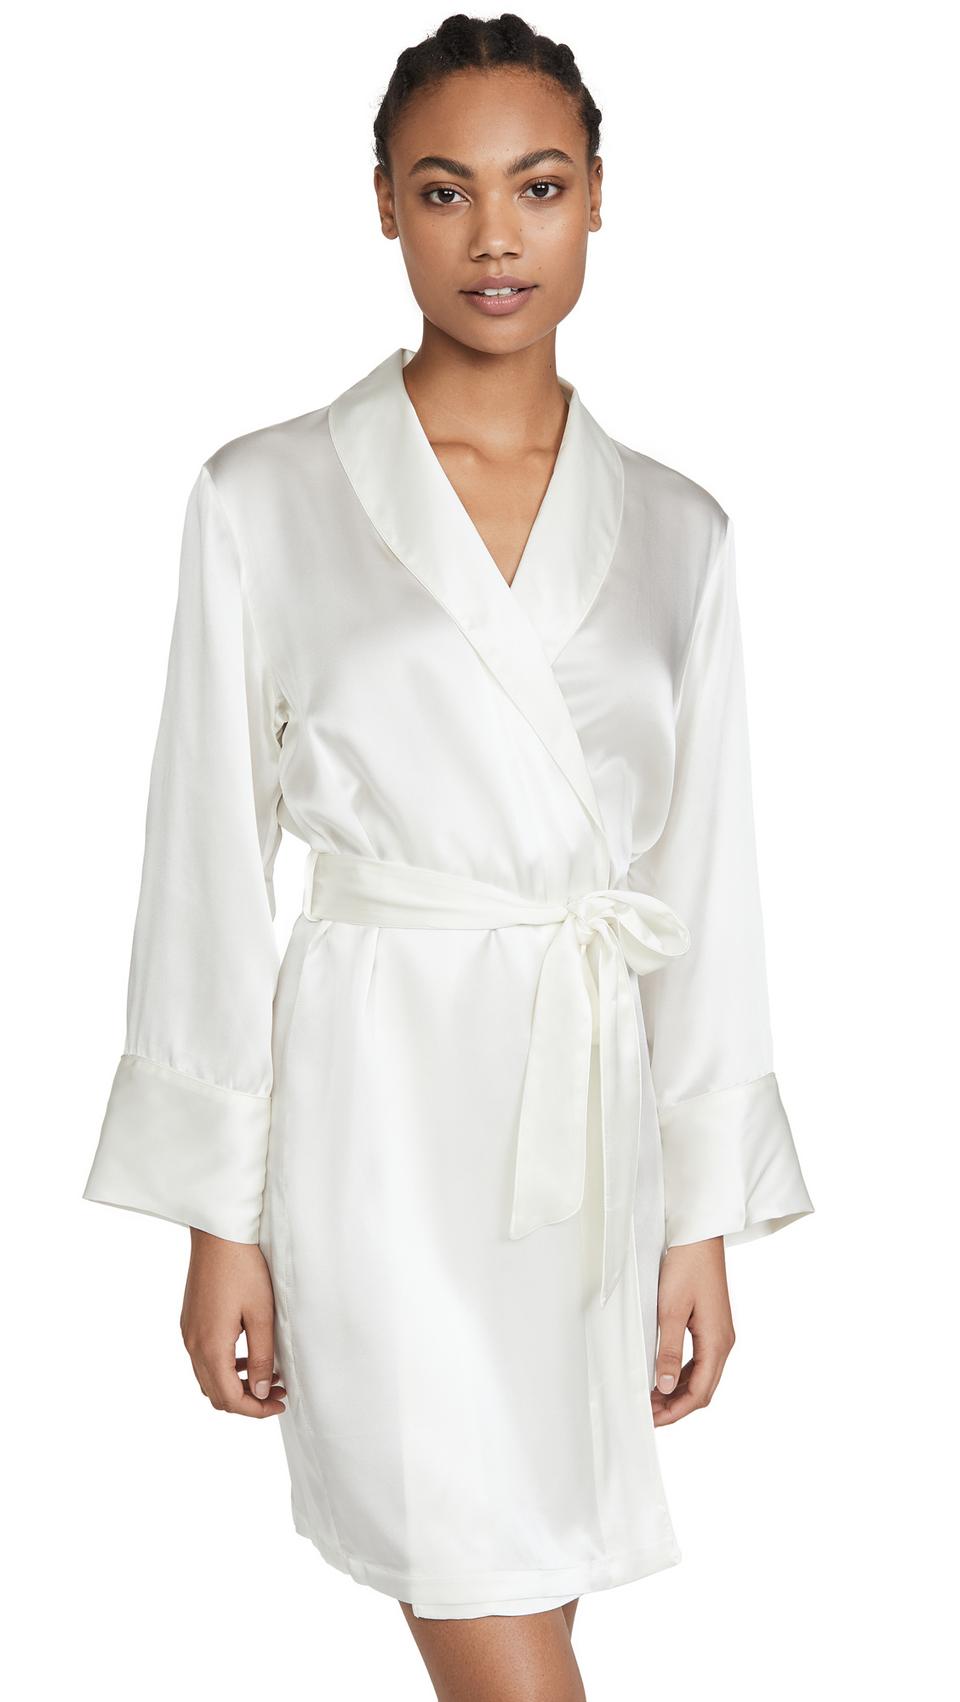 33 On-Trend Bridal Robes for a Chic Start to Your Big Day